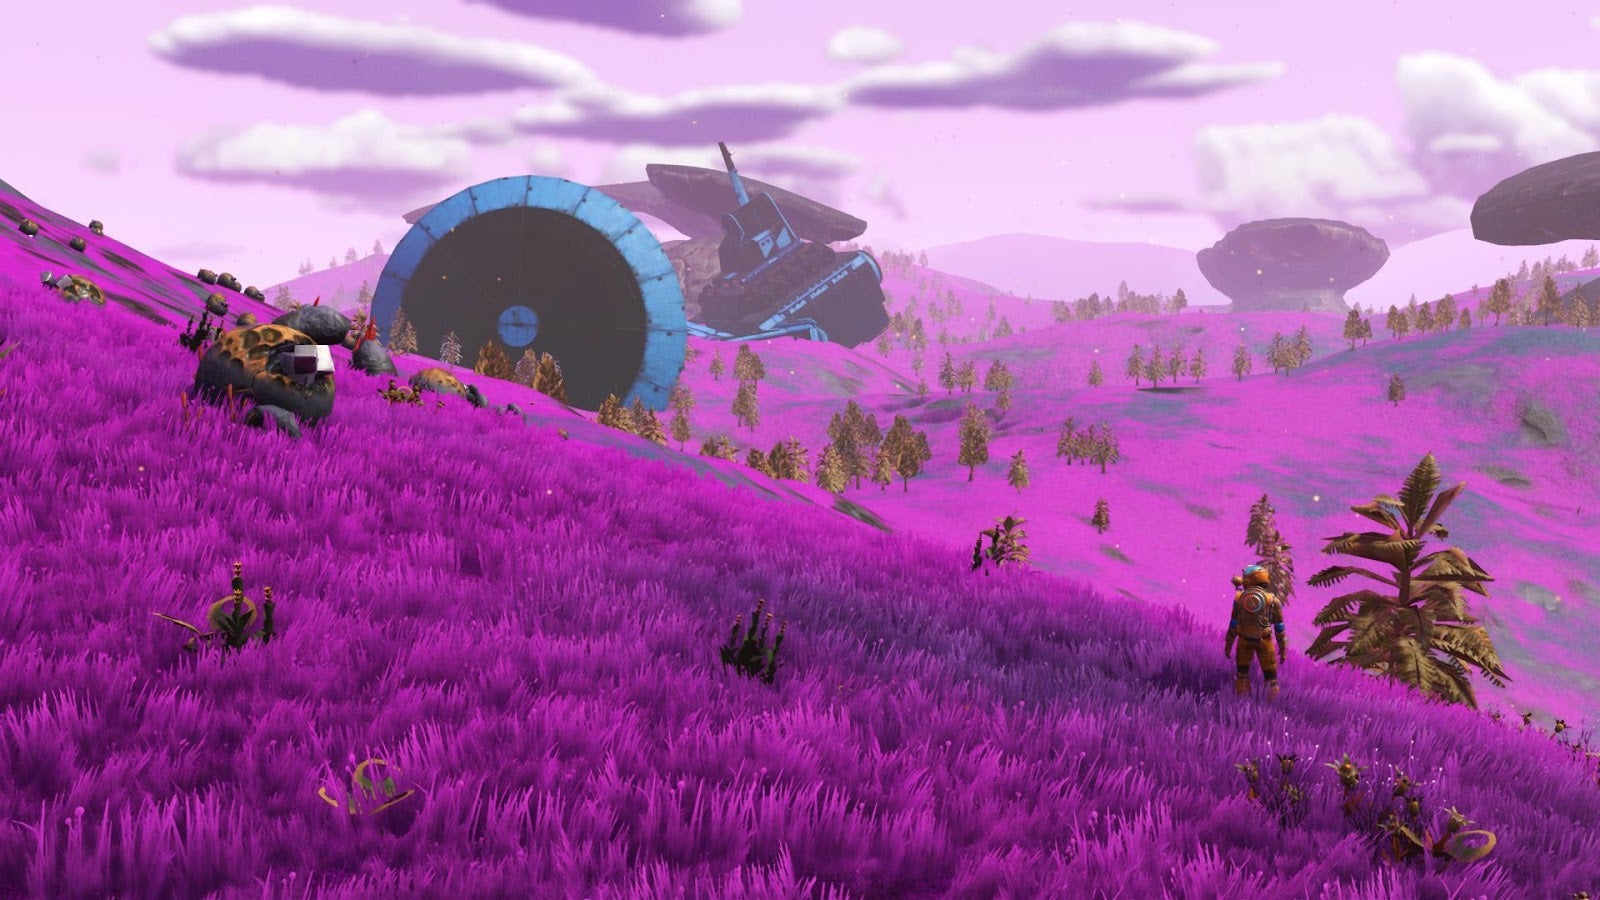 No Man’s Sky Players Are Spotting Pink Grass, And They’re Thrilled